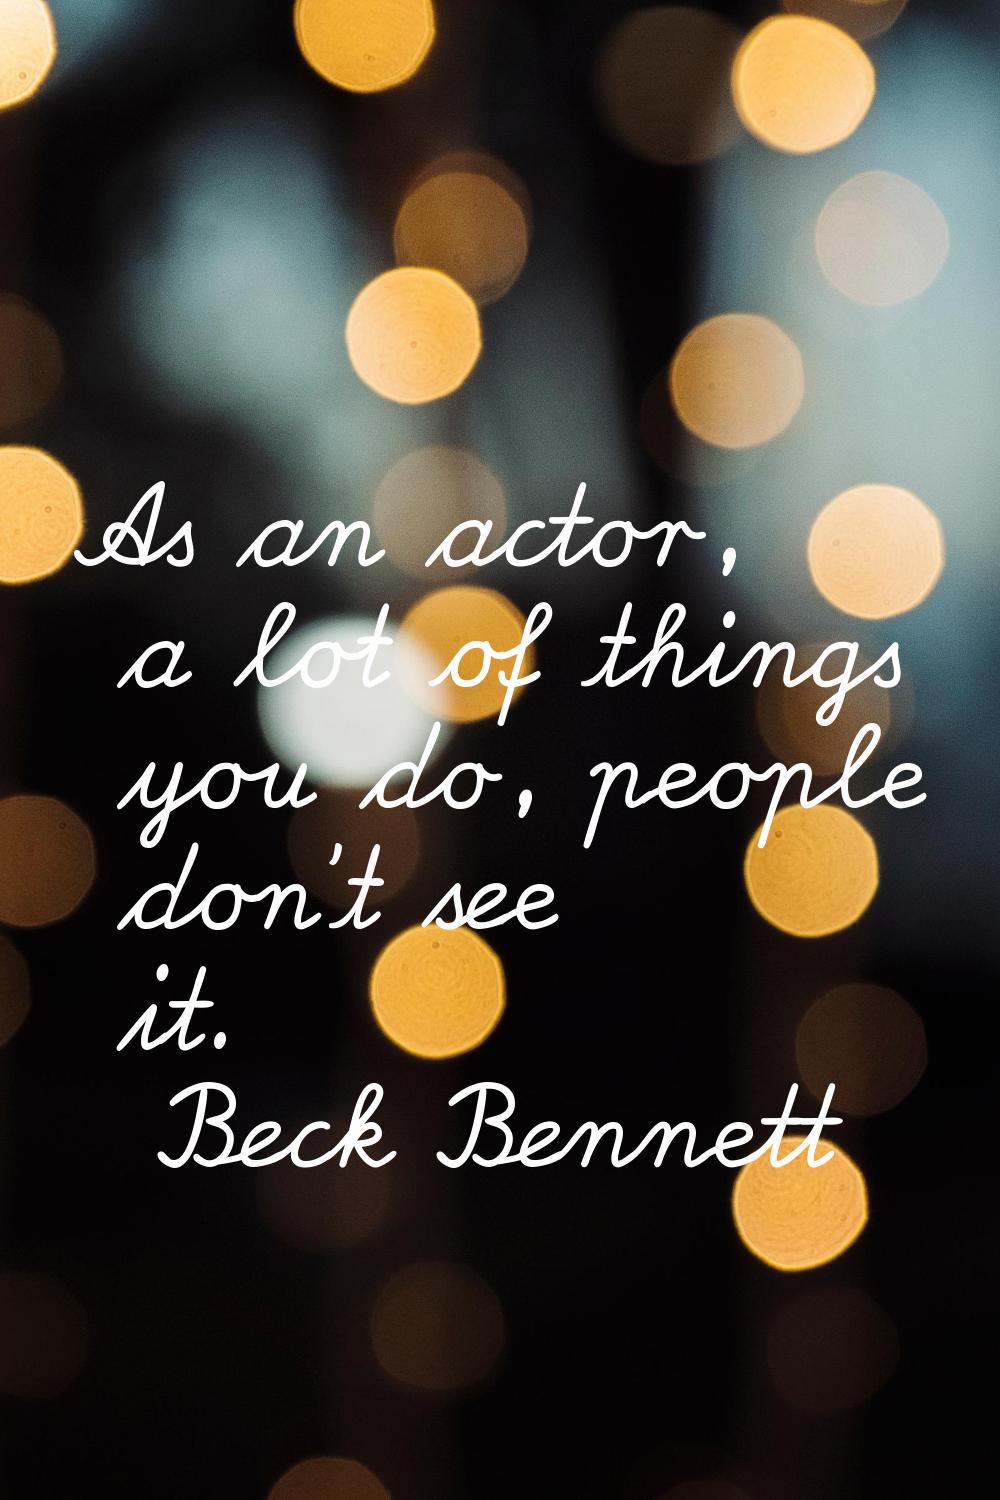 As an actor, a lot of things you do, people don't see it.